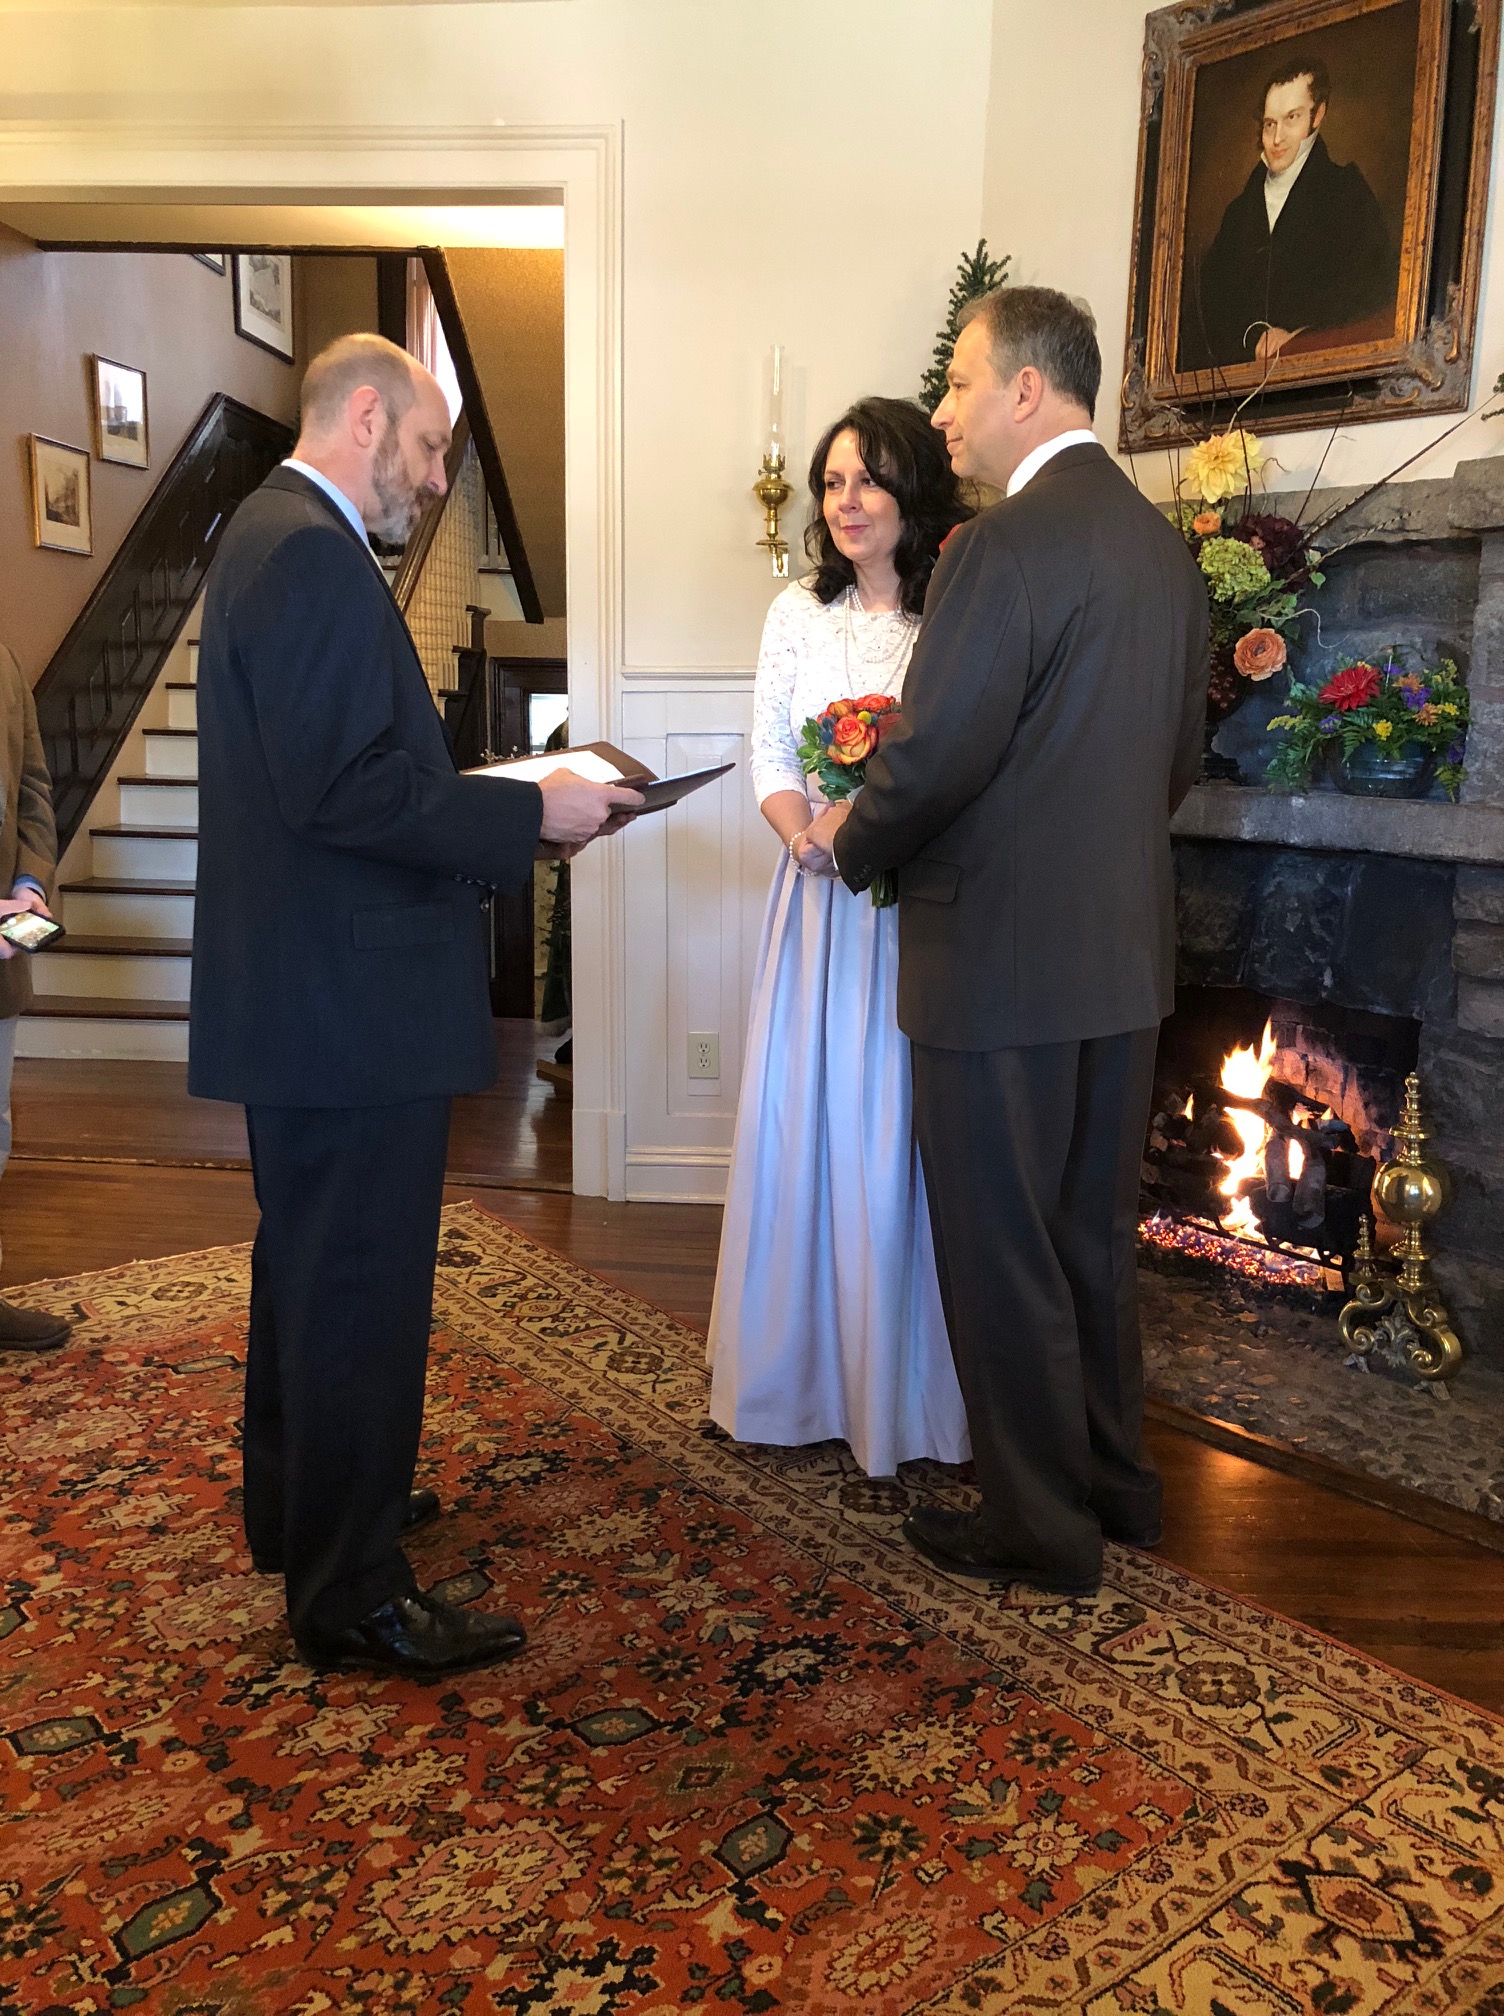 Asheville NC Elopement. A couple holding hands, standing in front of the mantelpiece with an officiant.